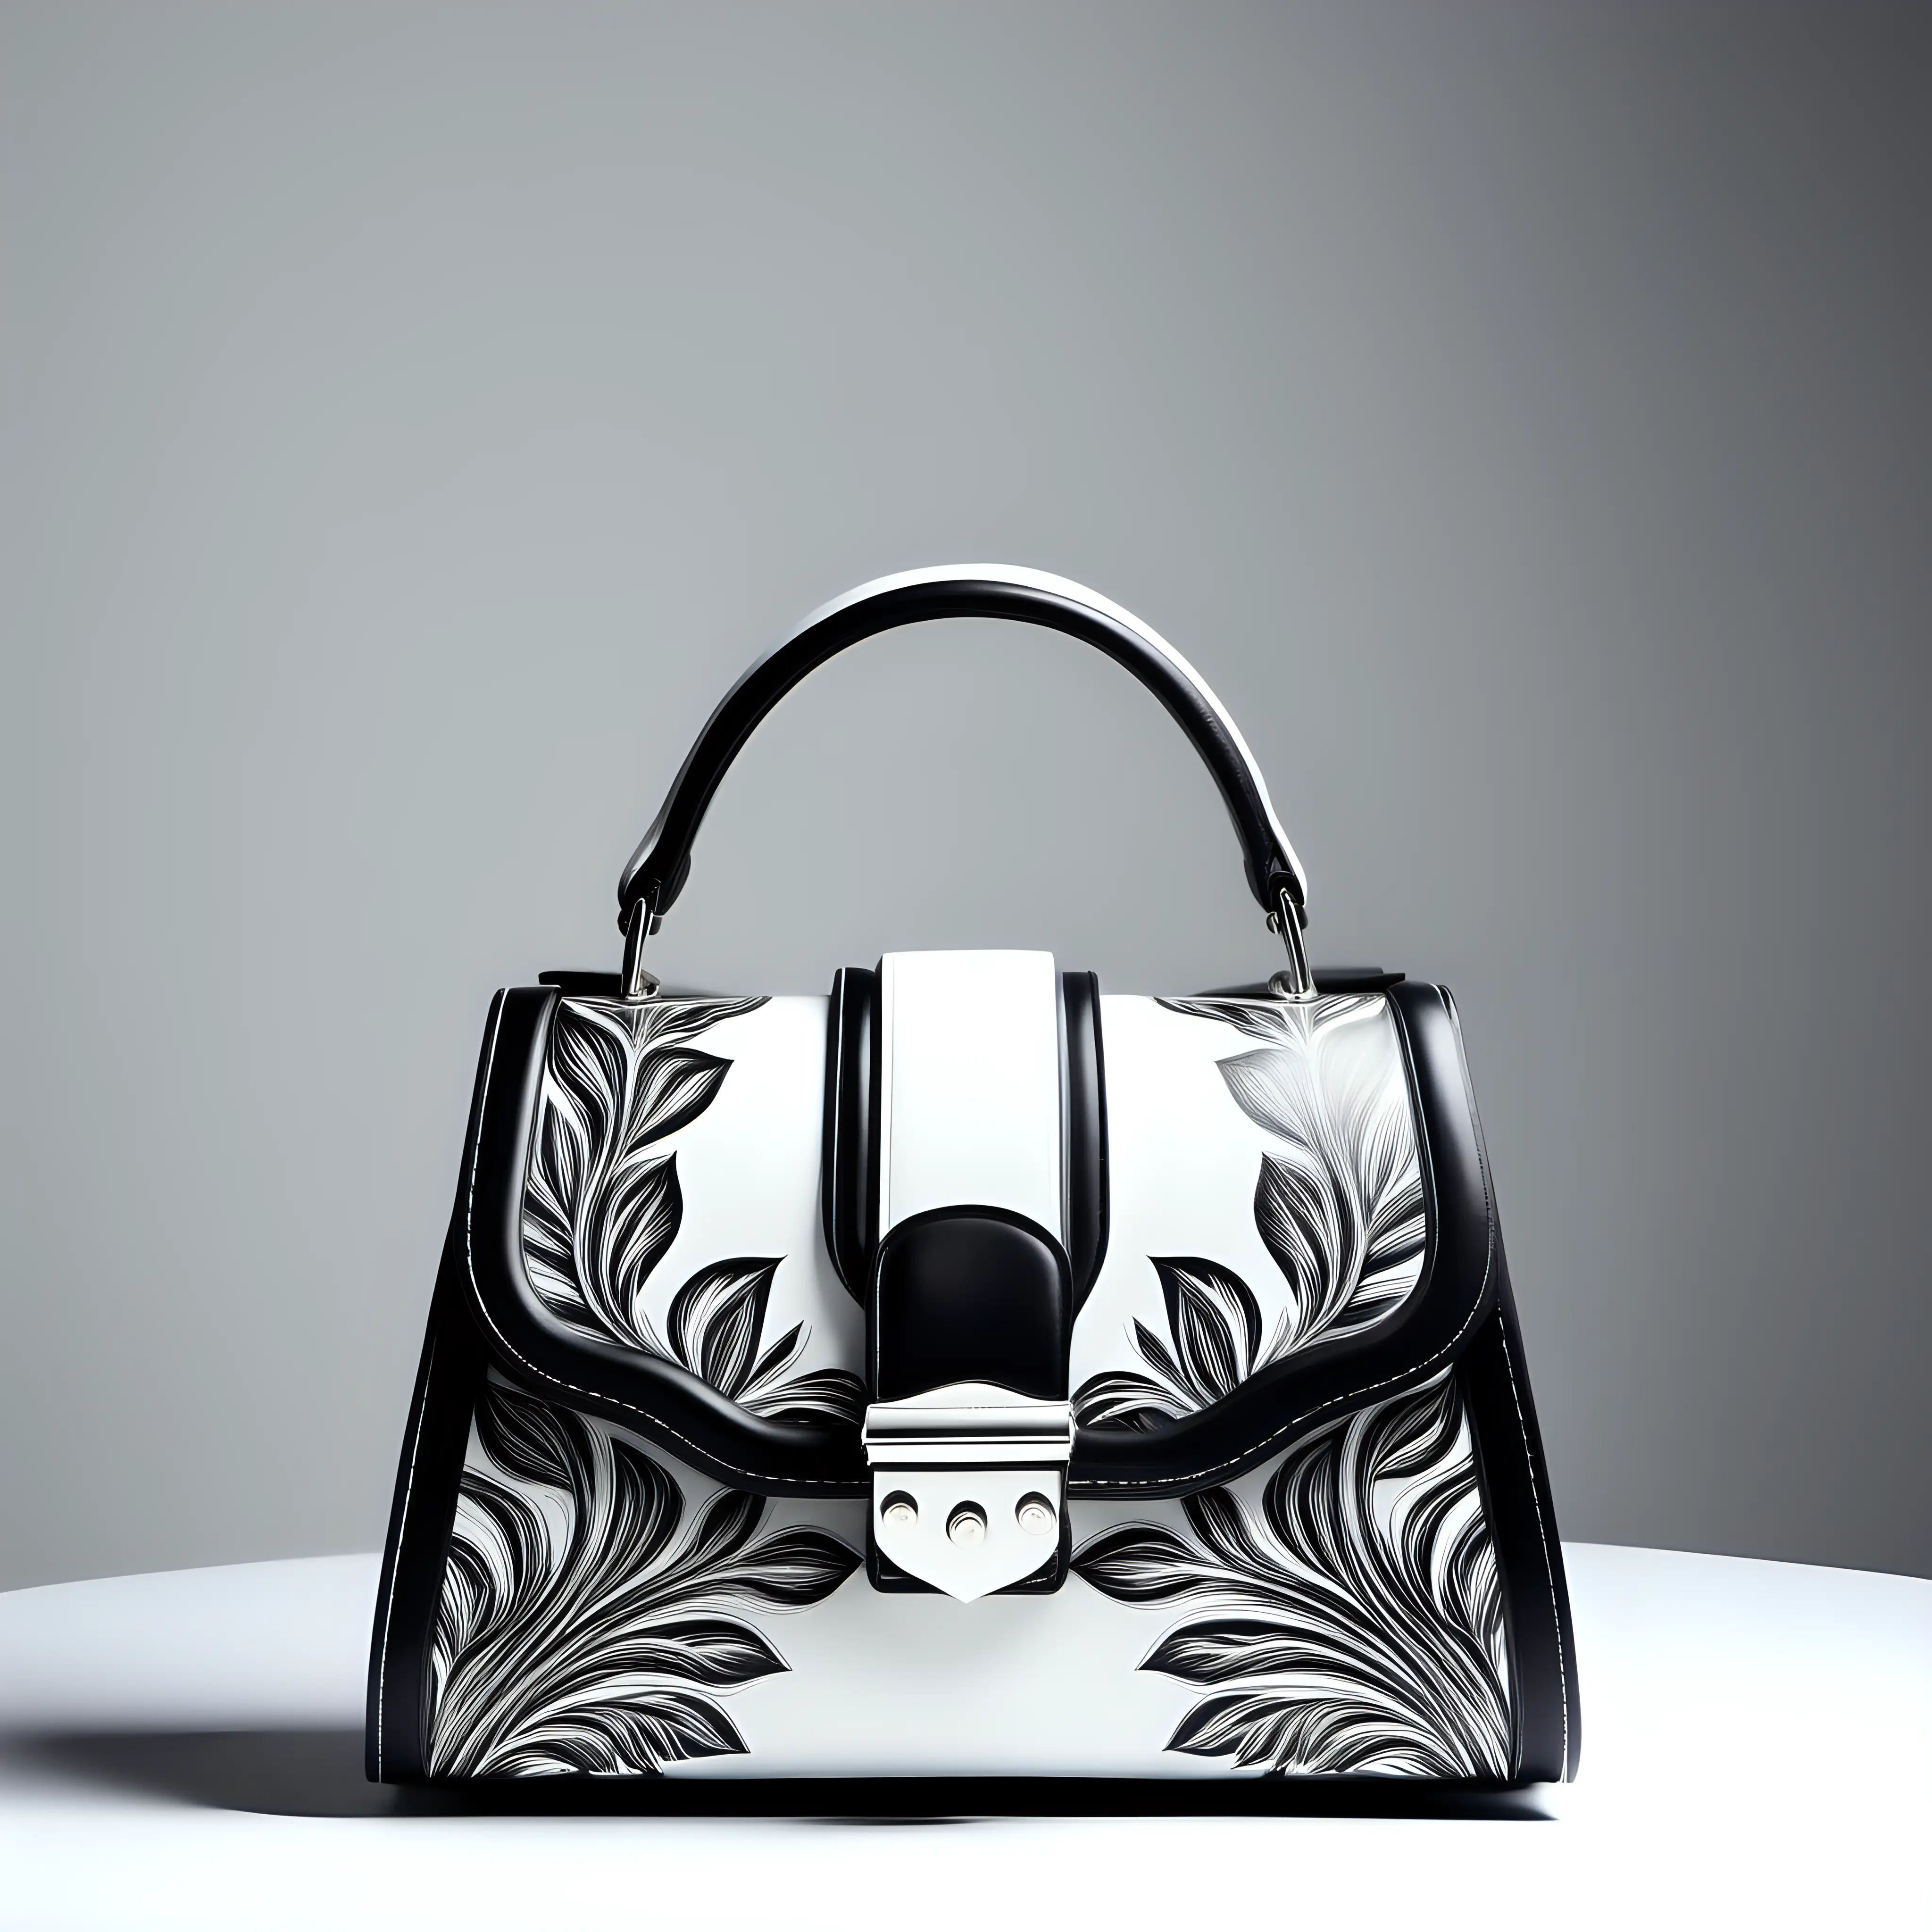 contemporary innovative style inspired luxury rilief printed leather bag - one handle - metal buckle - color contrast borders - frontal view -black and white shades